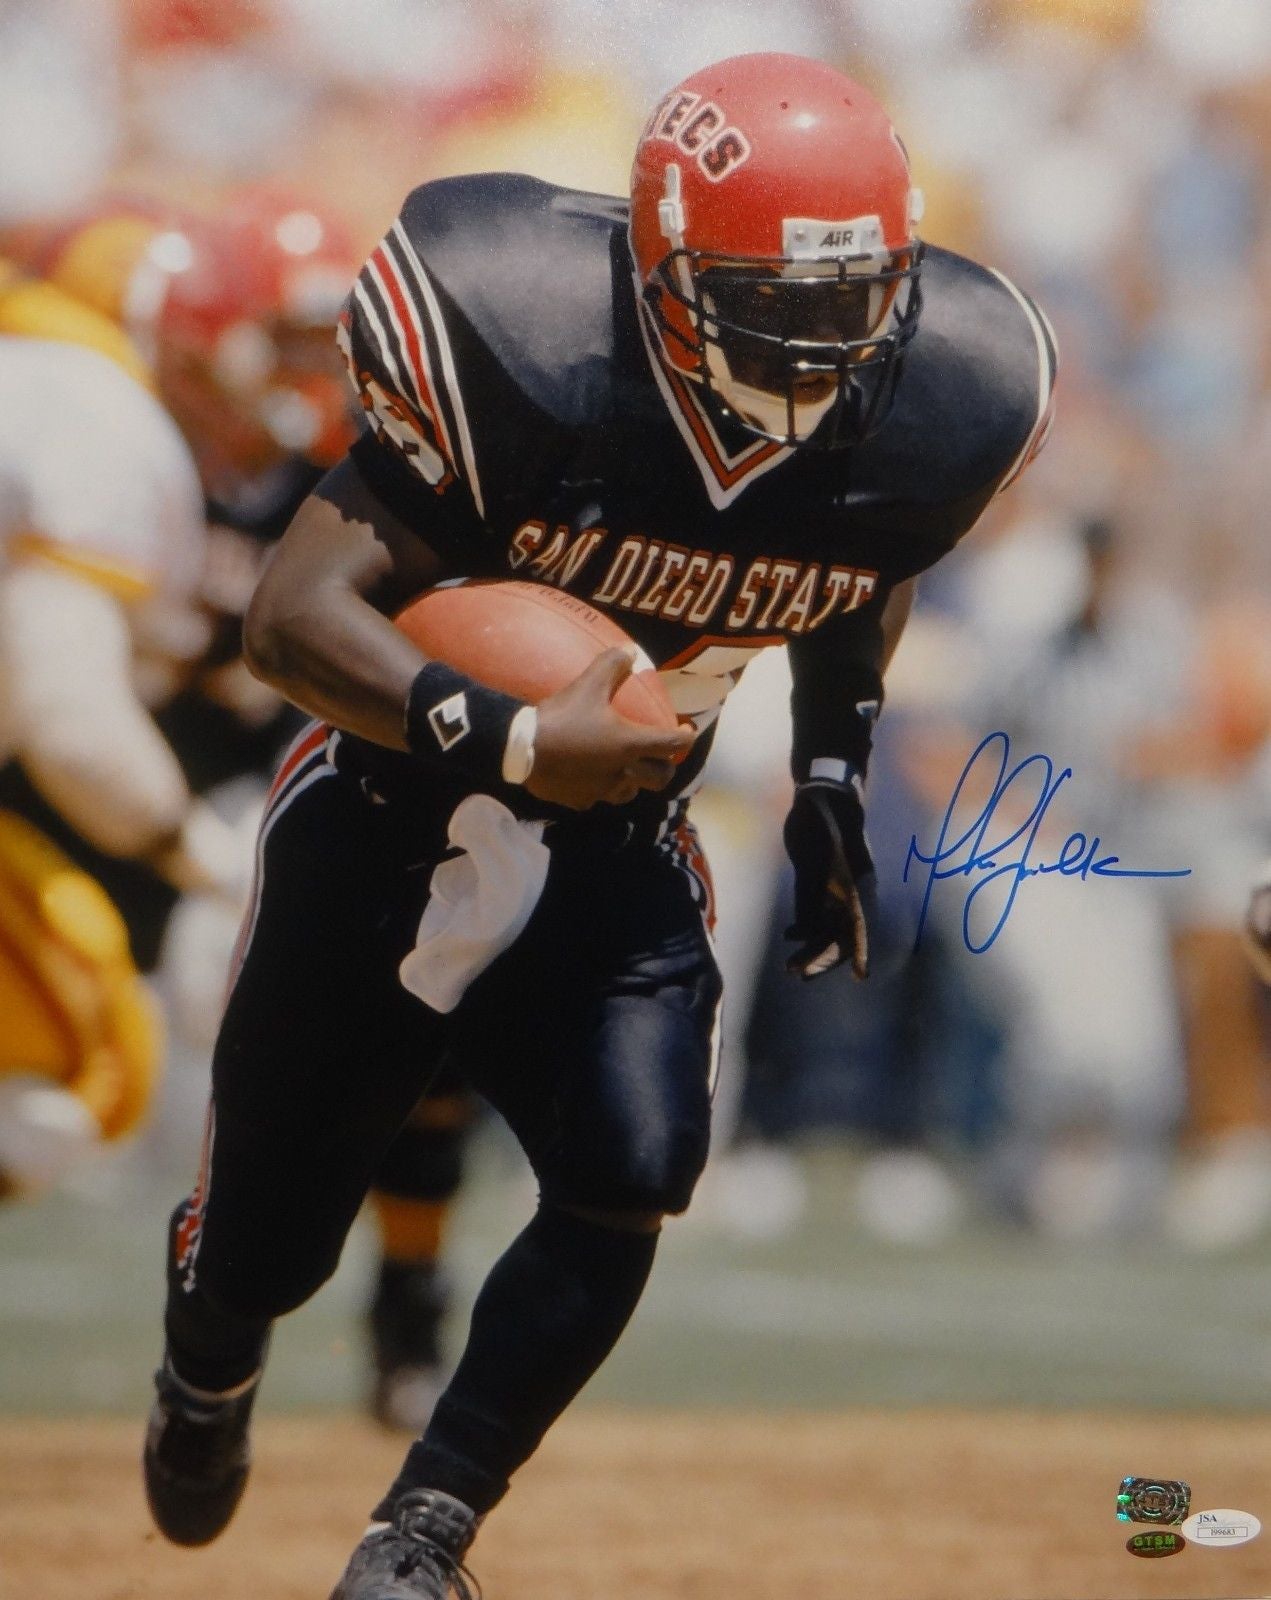 Marshall Faulk Autographed 16x20 San Diego State Vertical Photo